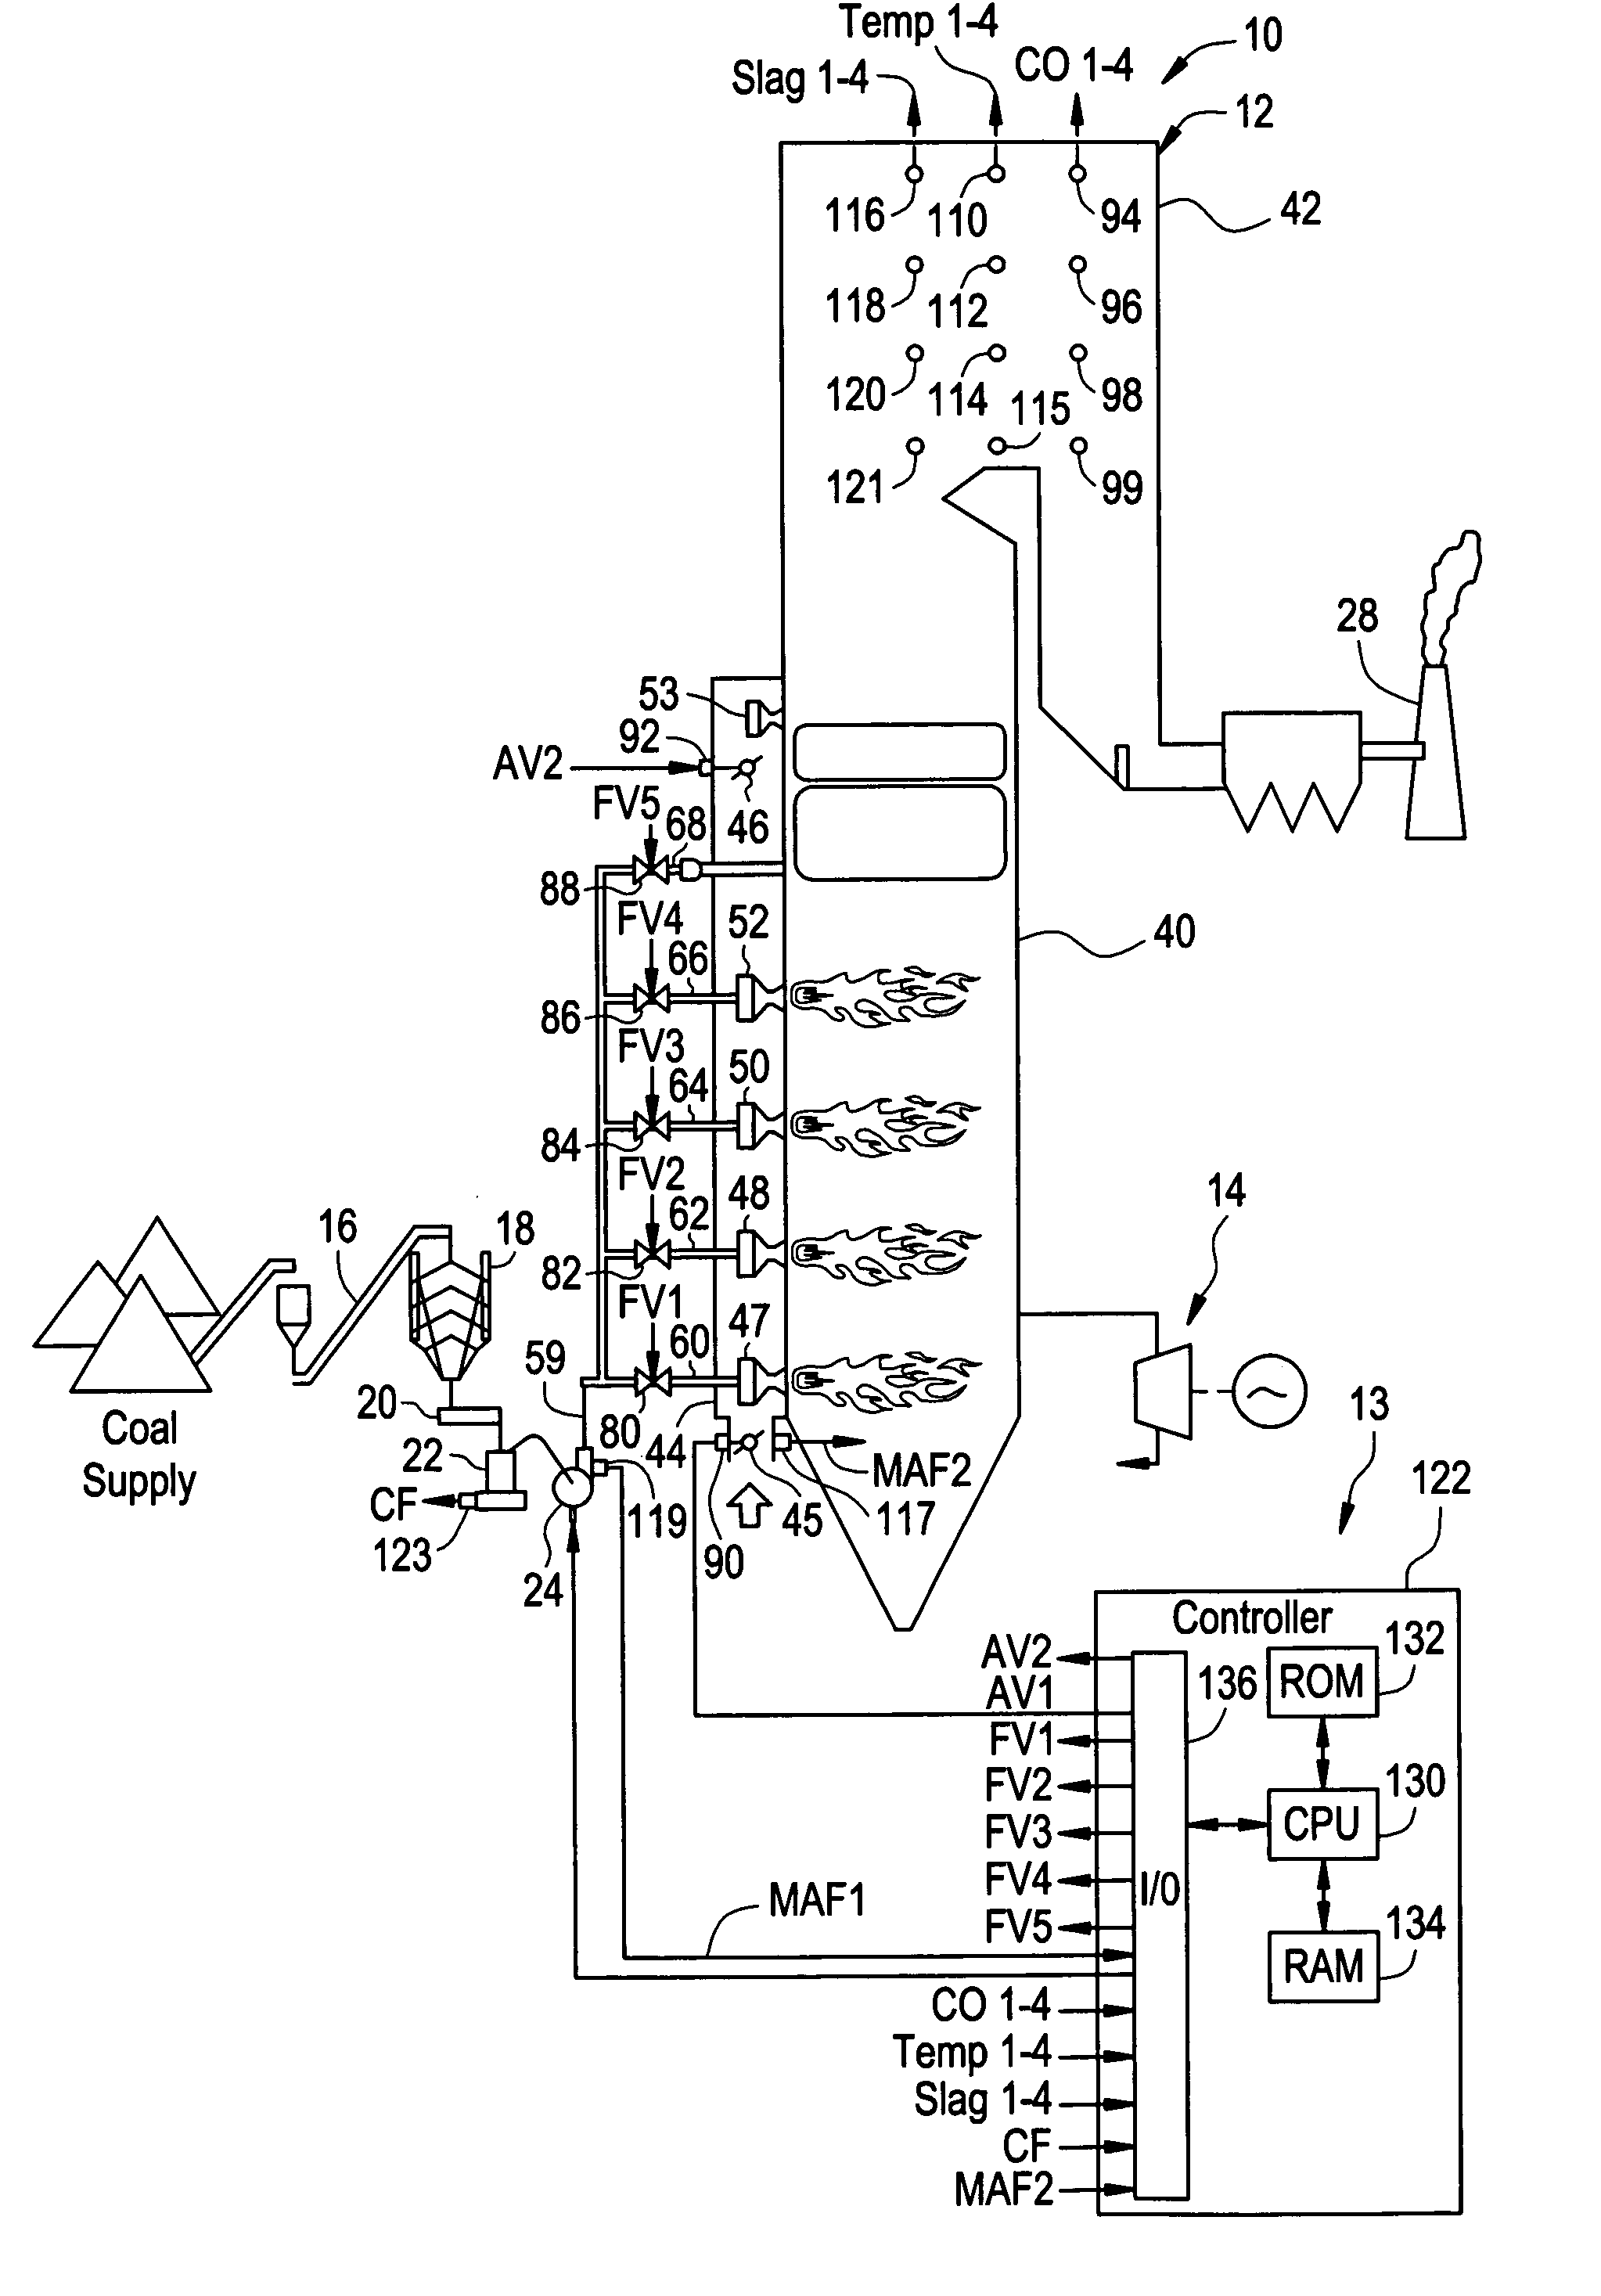 System, method, and article of manufacture for adjusting CO emission levels at predetermined locations in a boiler system